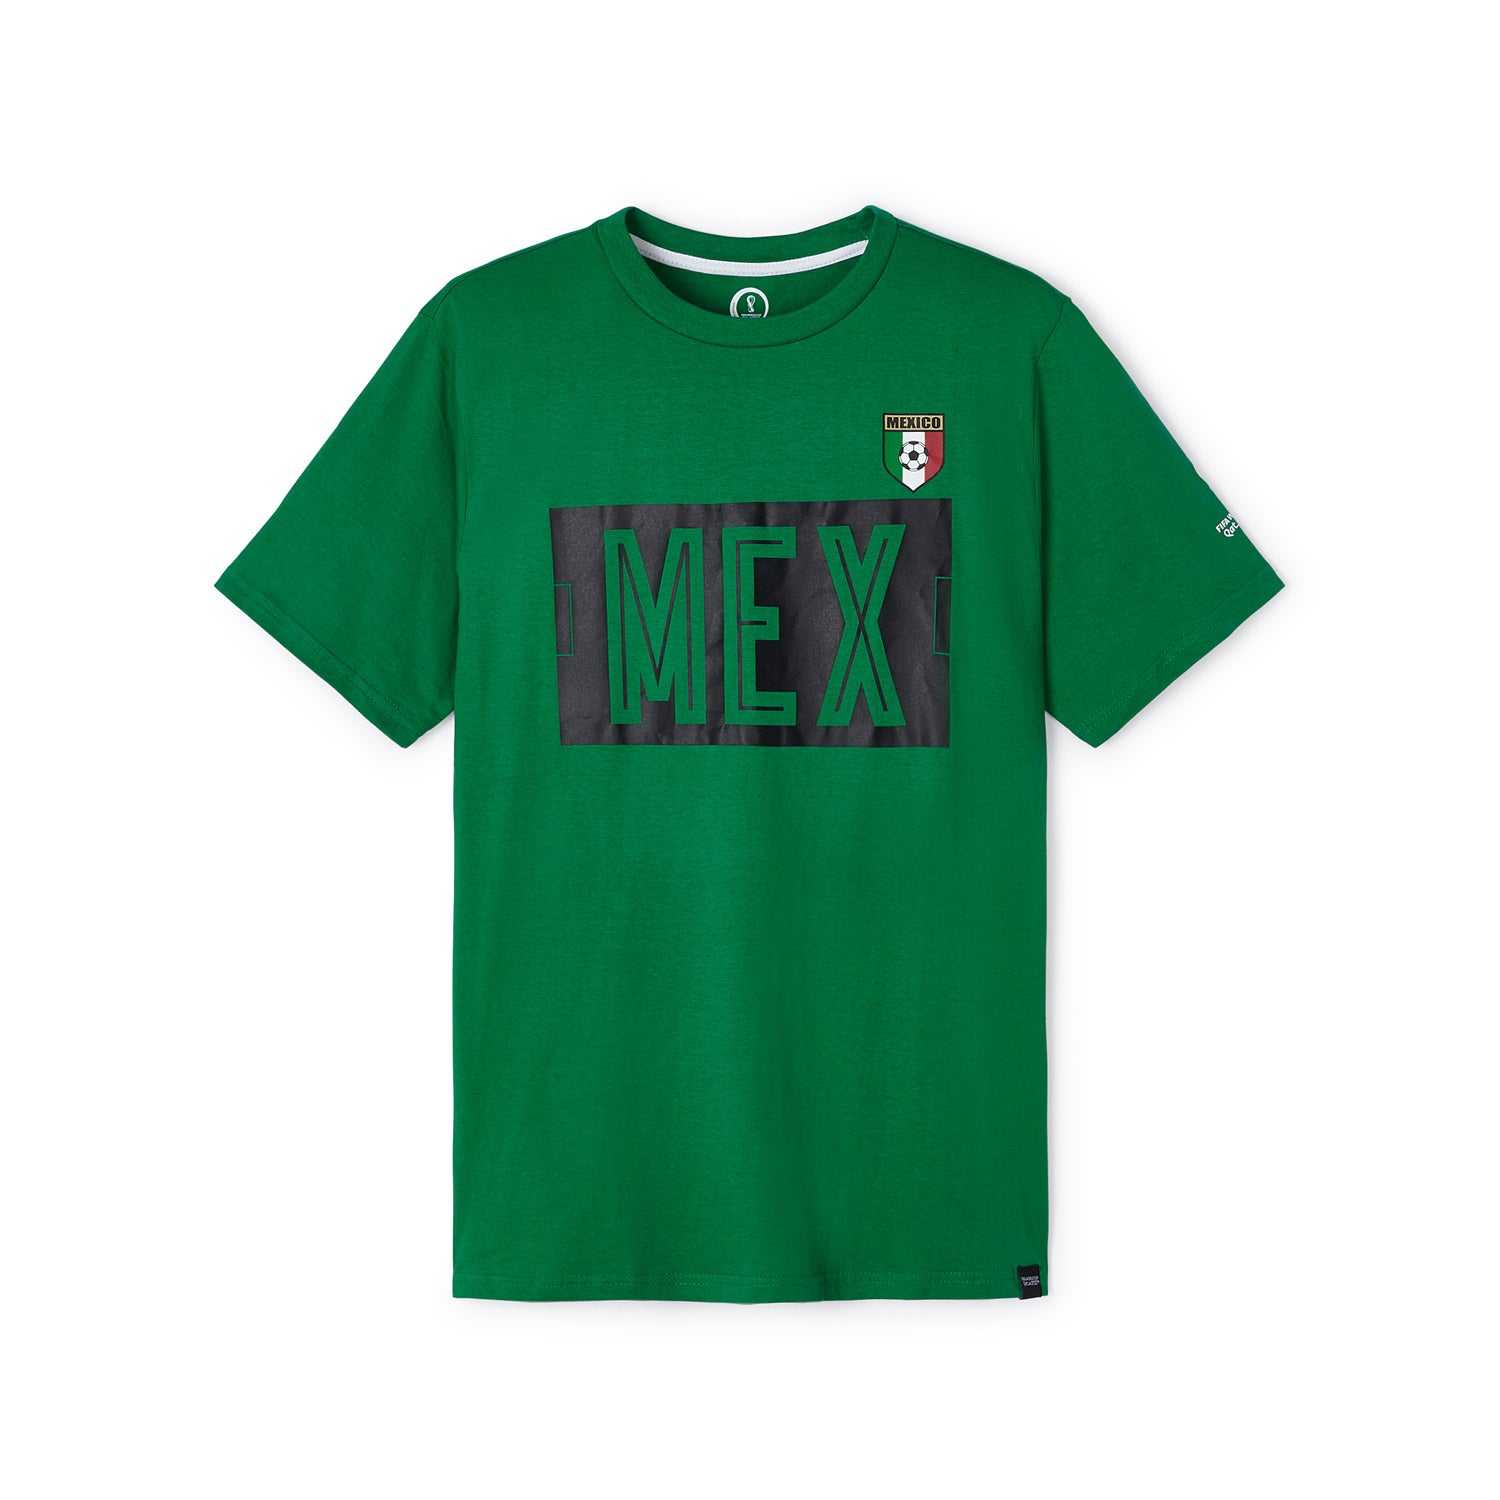 2022 World Cup Mexico Green T-Shirt - Mens